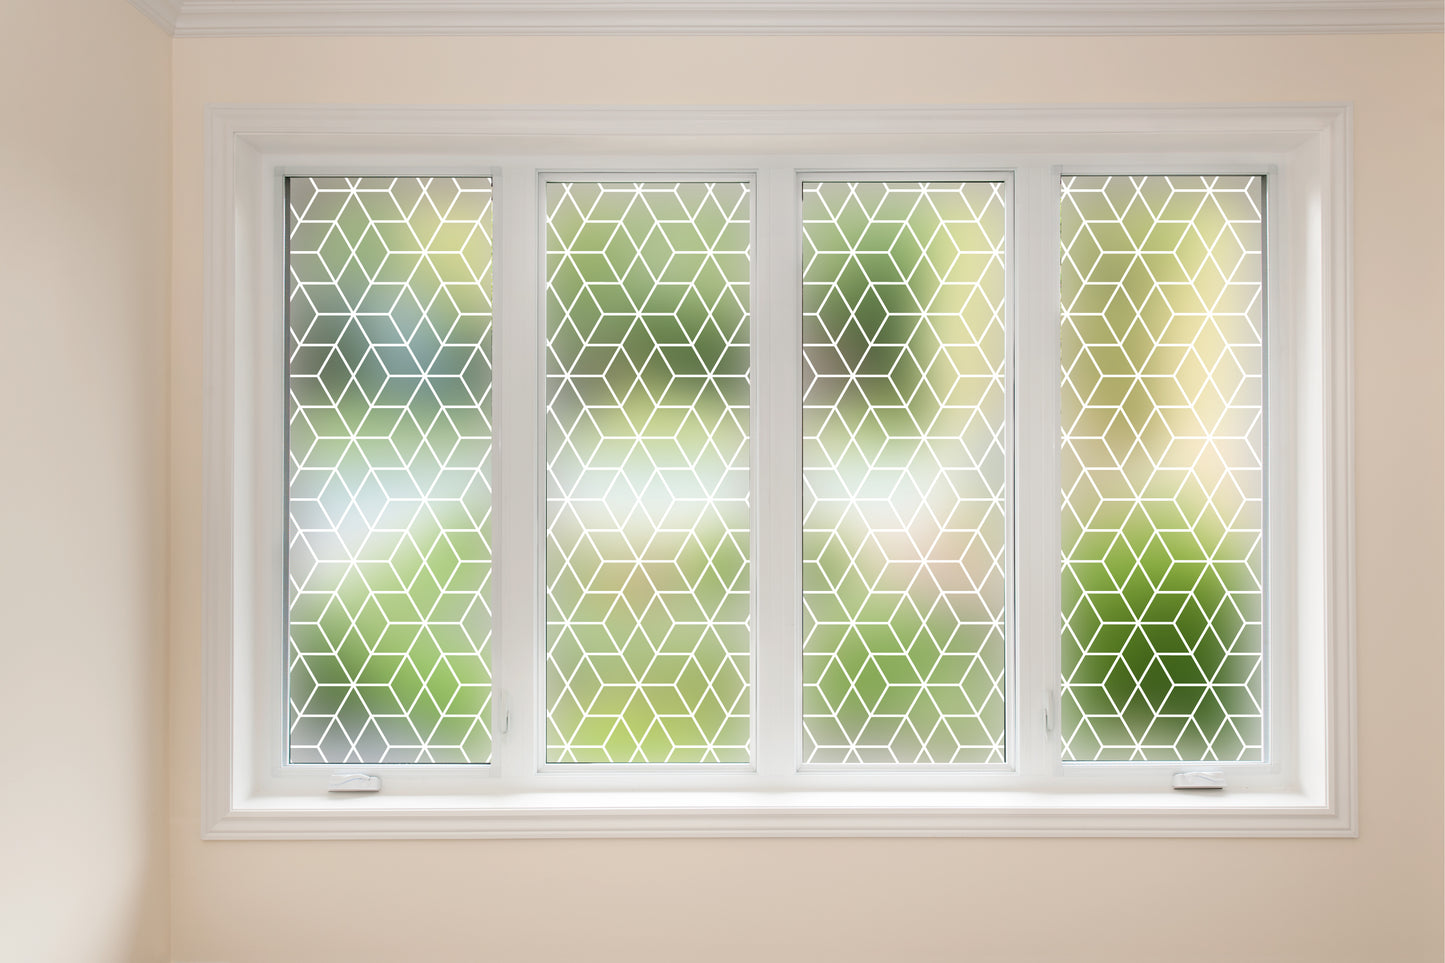 Geometric Outlines Frosted Window Privacy Glass Film